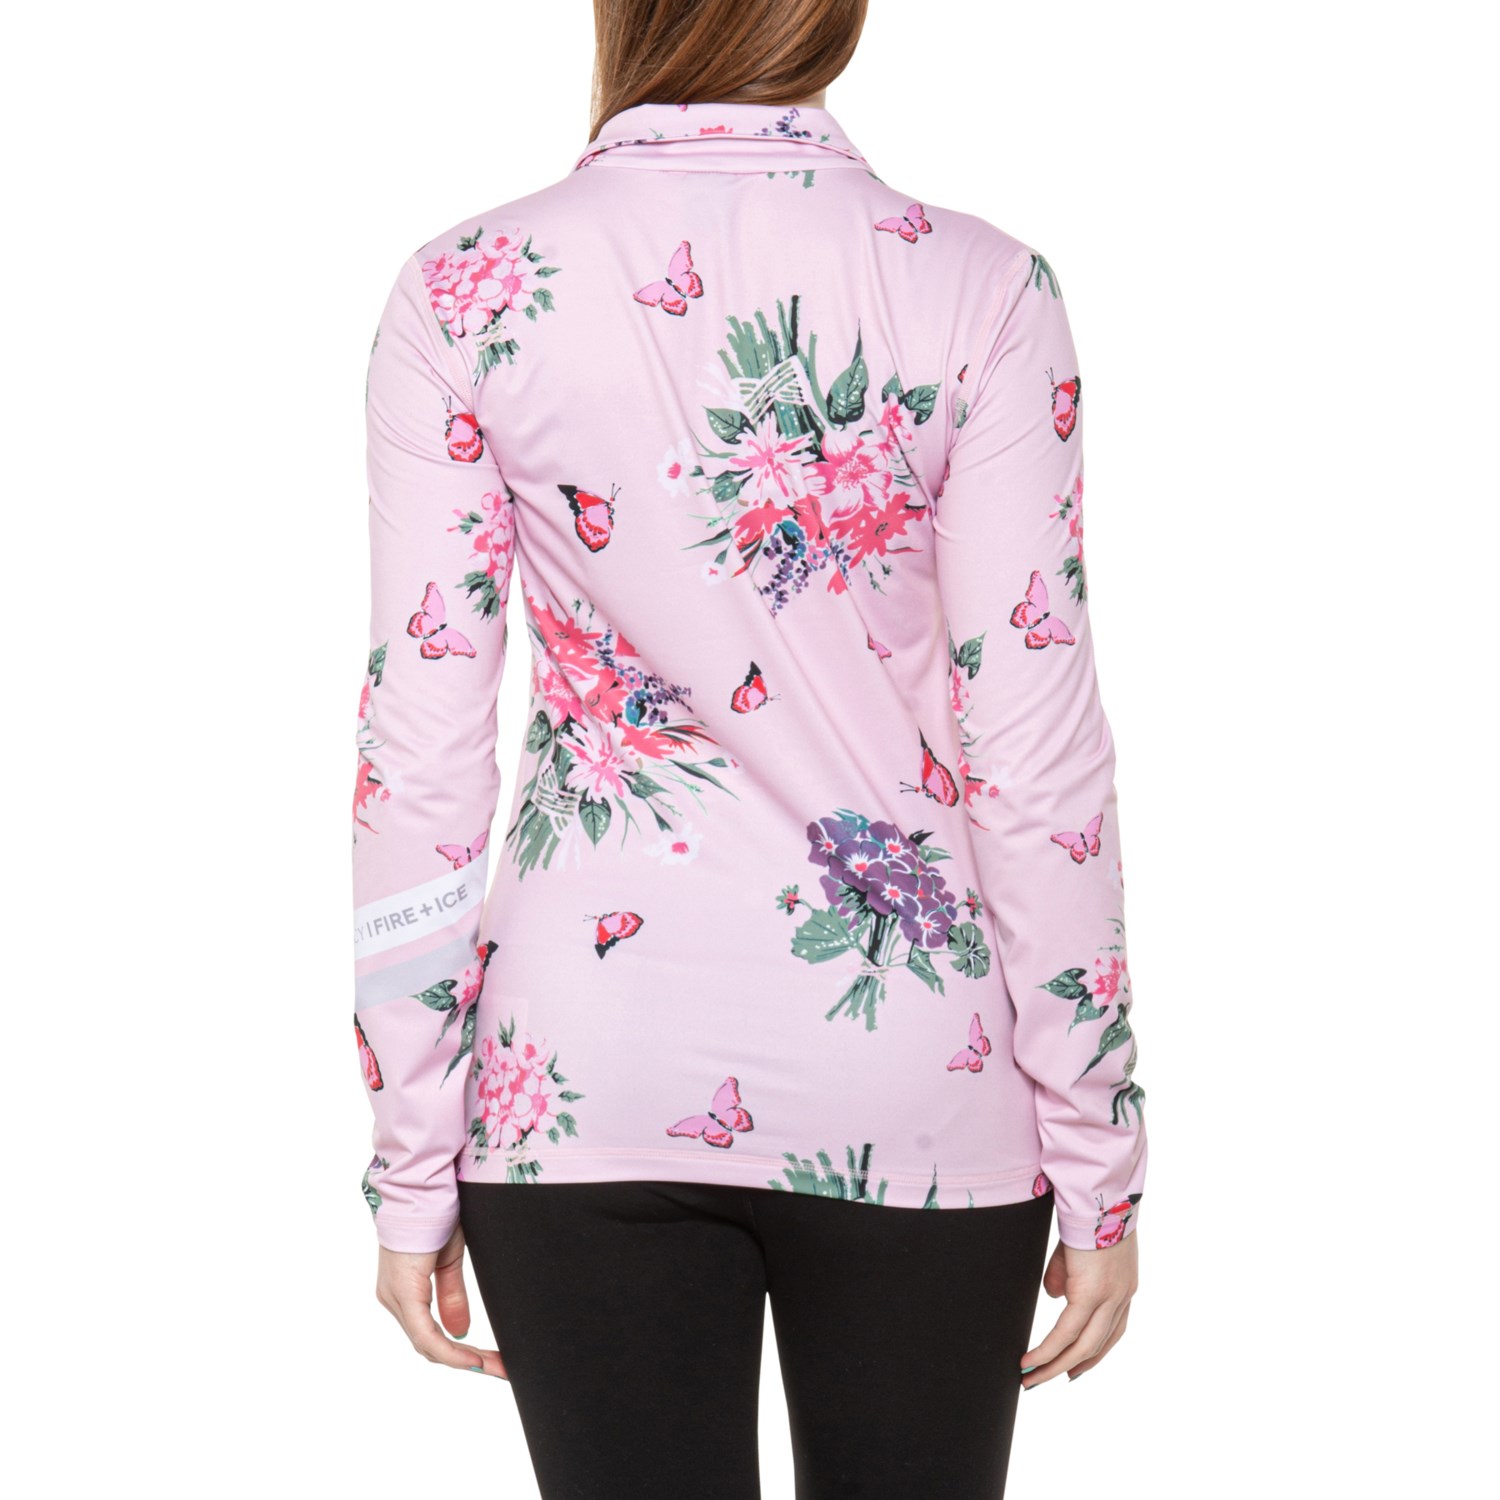 BOGNER FIRE + ICE X LOVE SHACK FANCY Ilvy3 Printed Base Layer Top - Zip  Neck, Long Sleeve - Save 70%